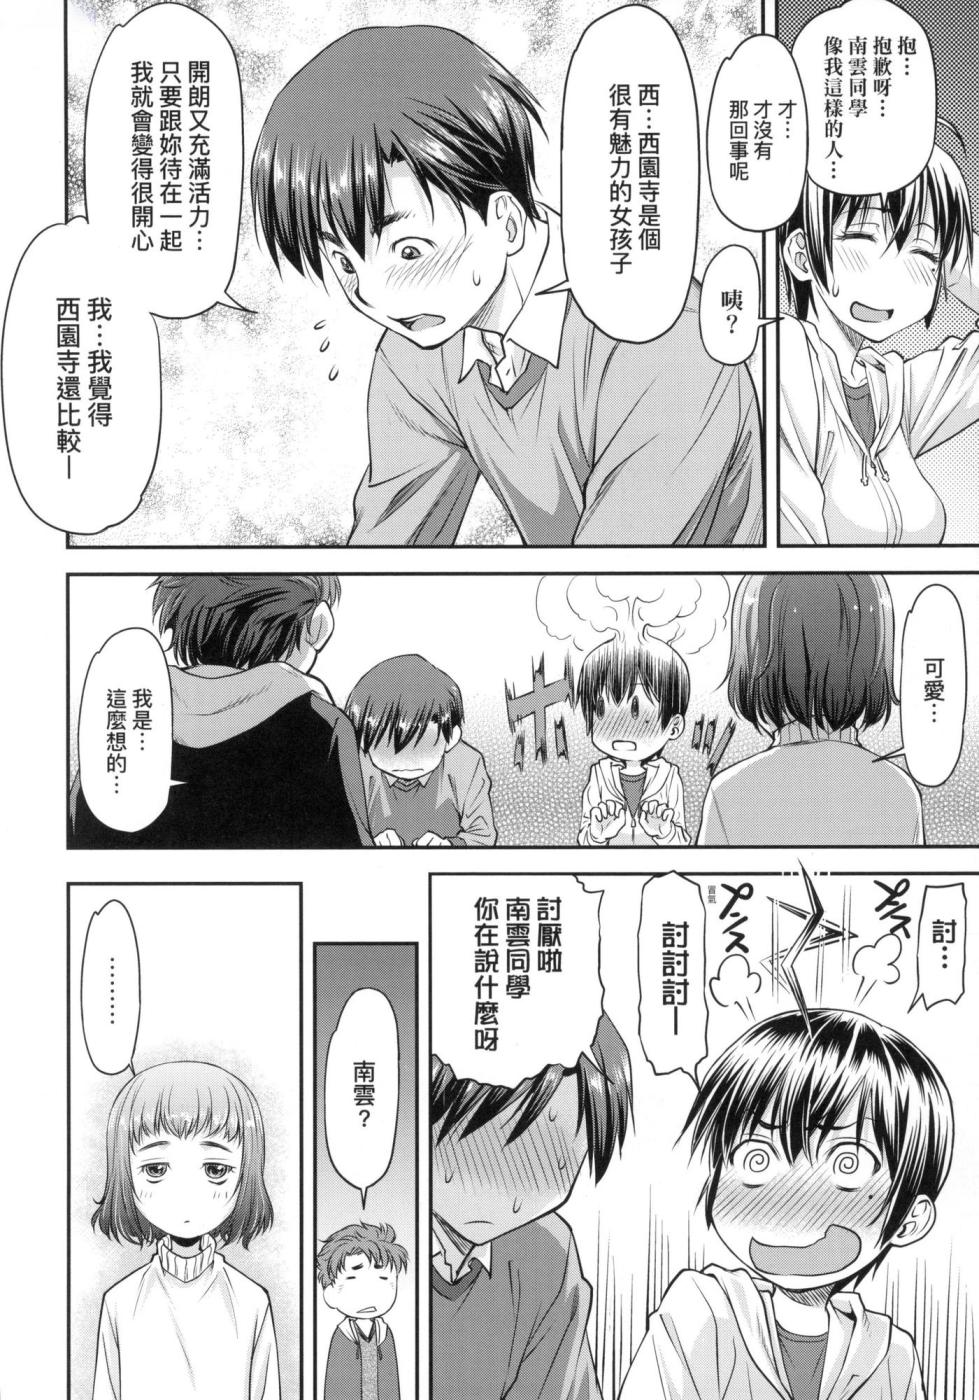 [Nagare Ippon] Kaname Date Jou | 小要開發Date 上 [Chinese] [Decensored] - Page 15